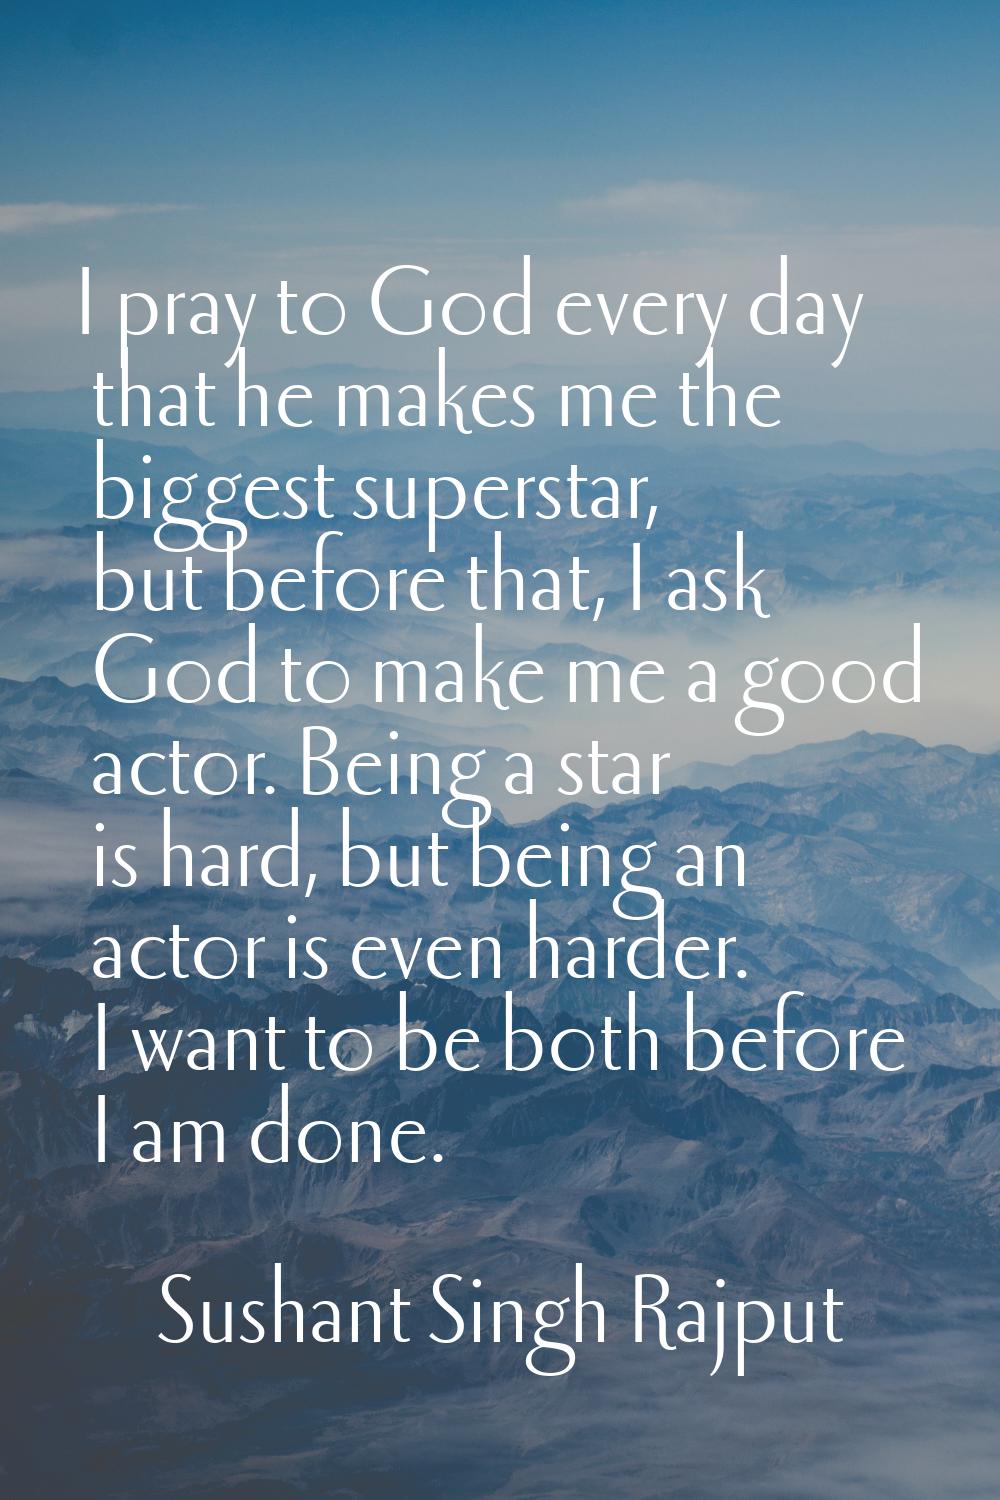 I pray to God every day that he makes me the biggest superstar, but before that, I ask God to make 